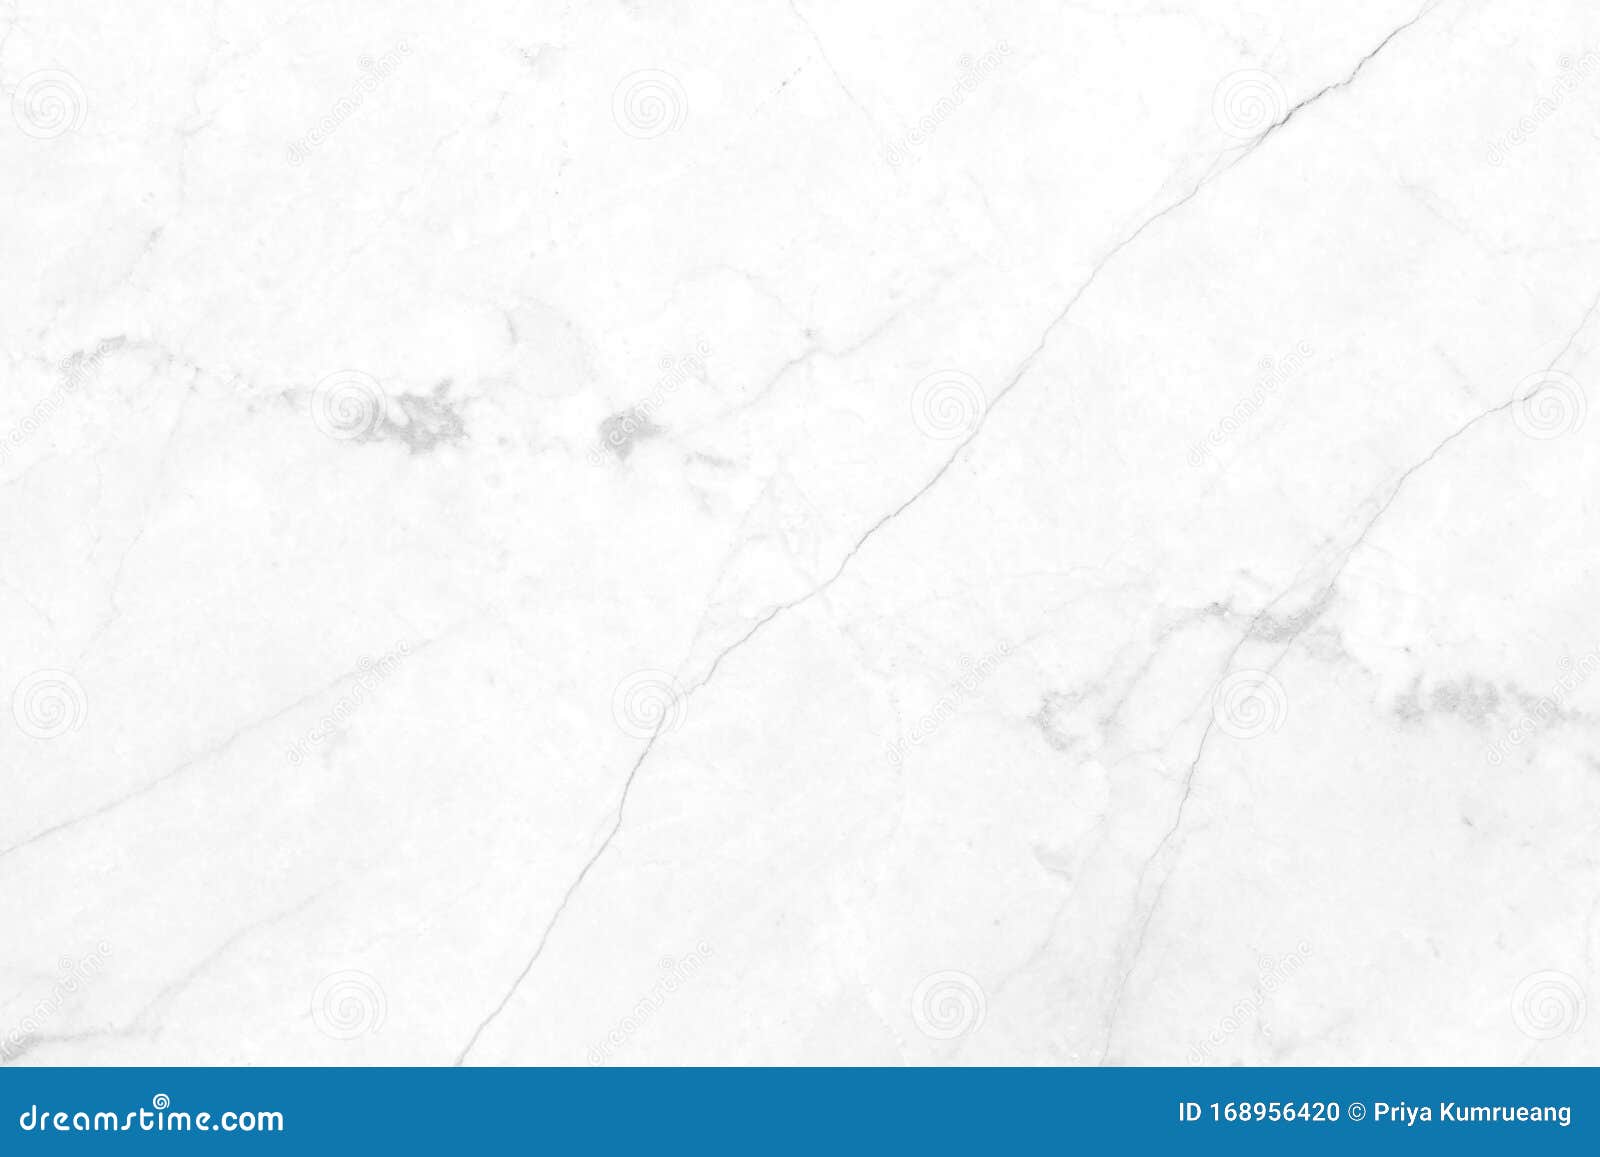 Beautiful Patterned White Marble Background with Scratches Stock Photo ...